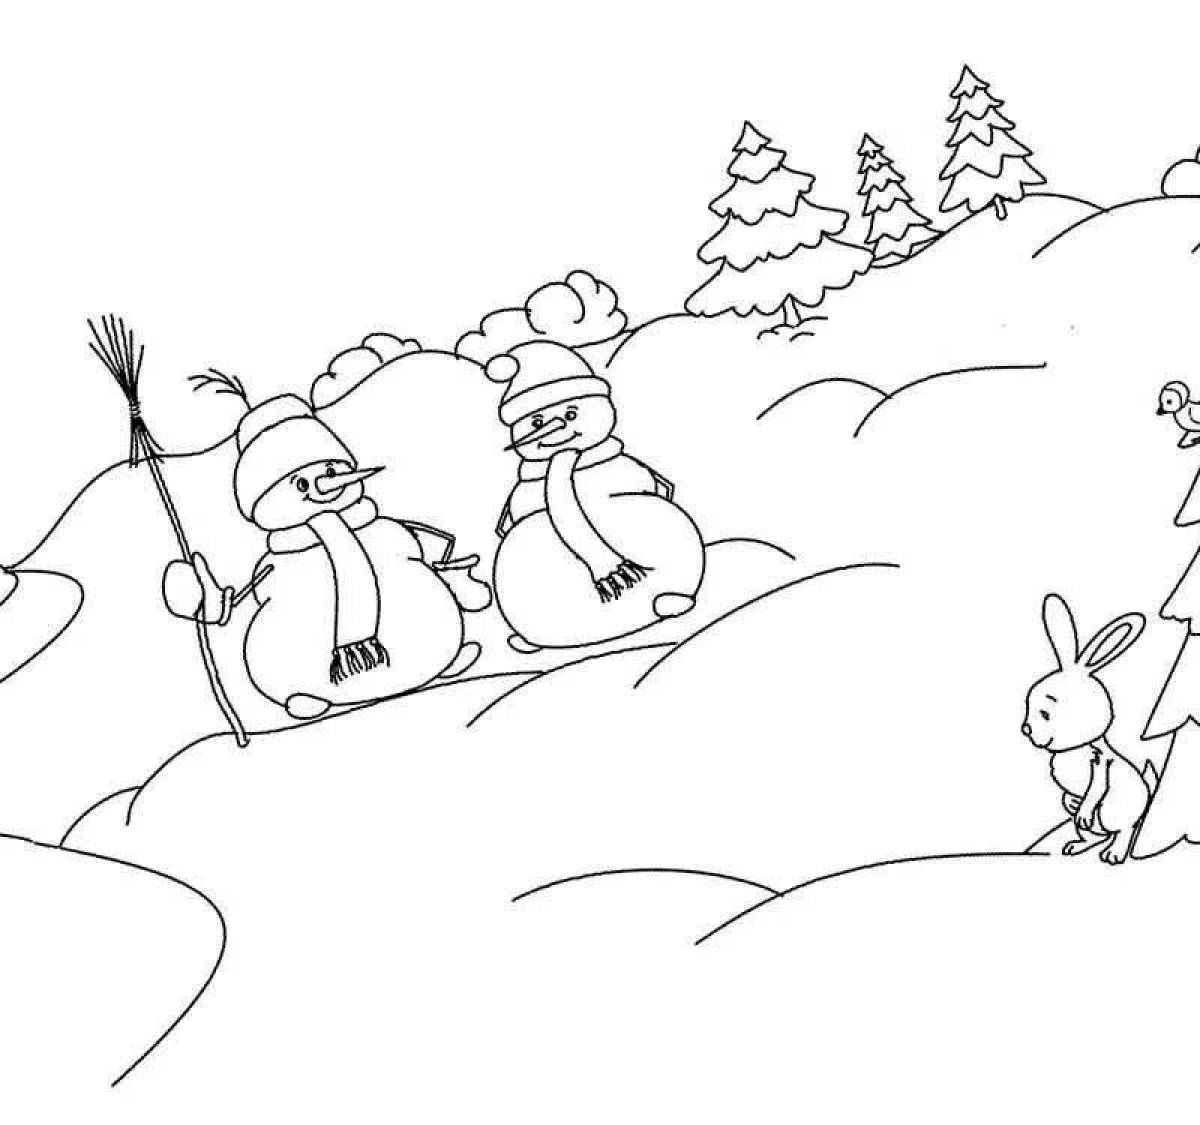 Exalted coloring pages for kids winter nature